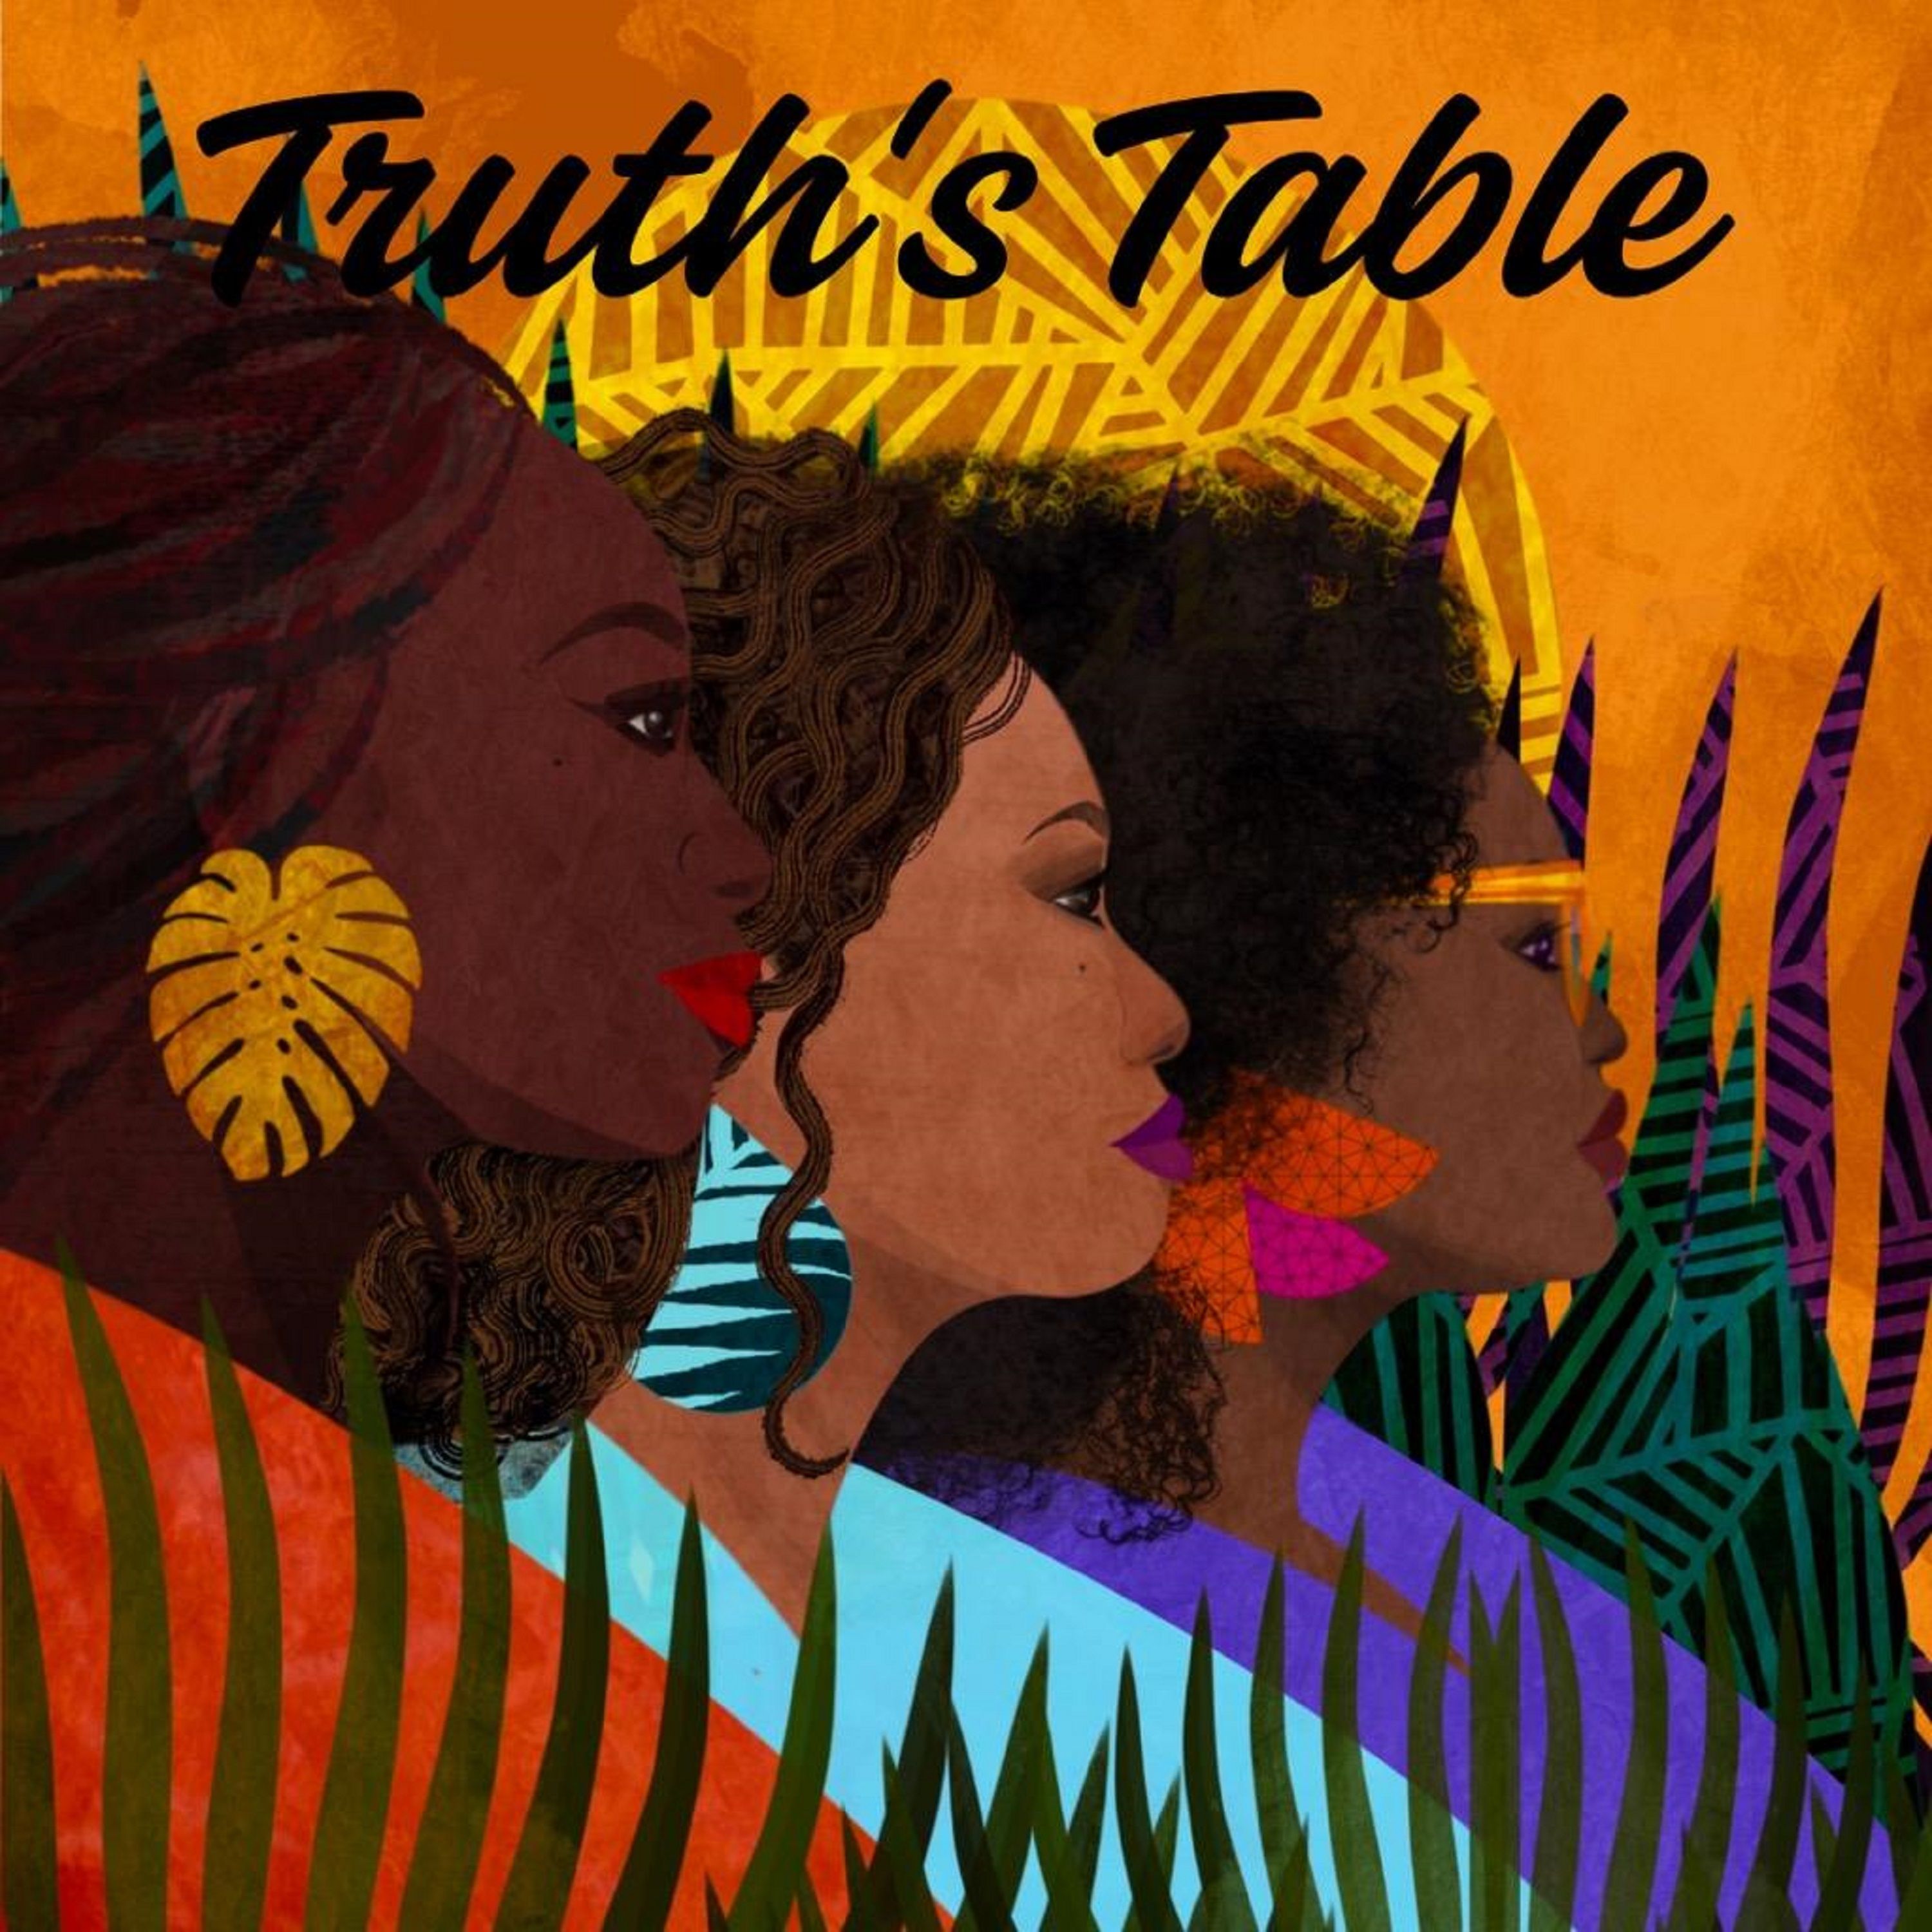 COMING SOON: Get in The Word with Truth’s Table